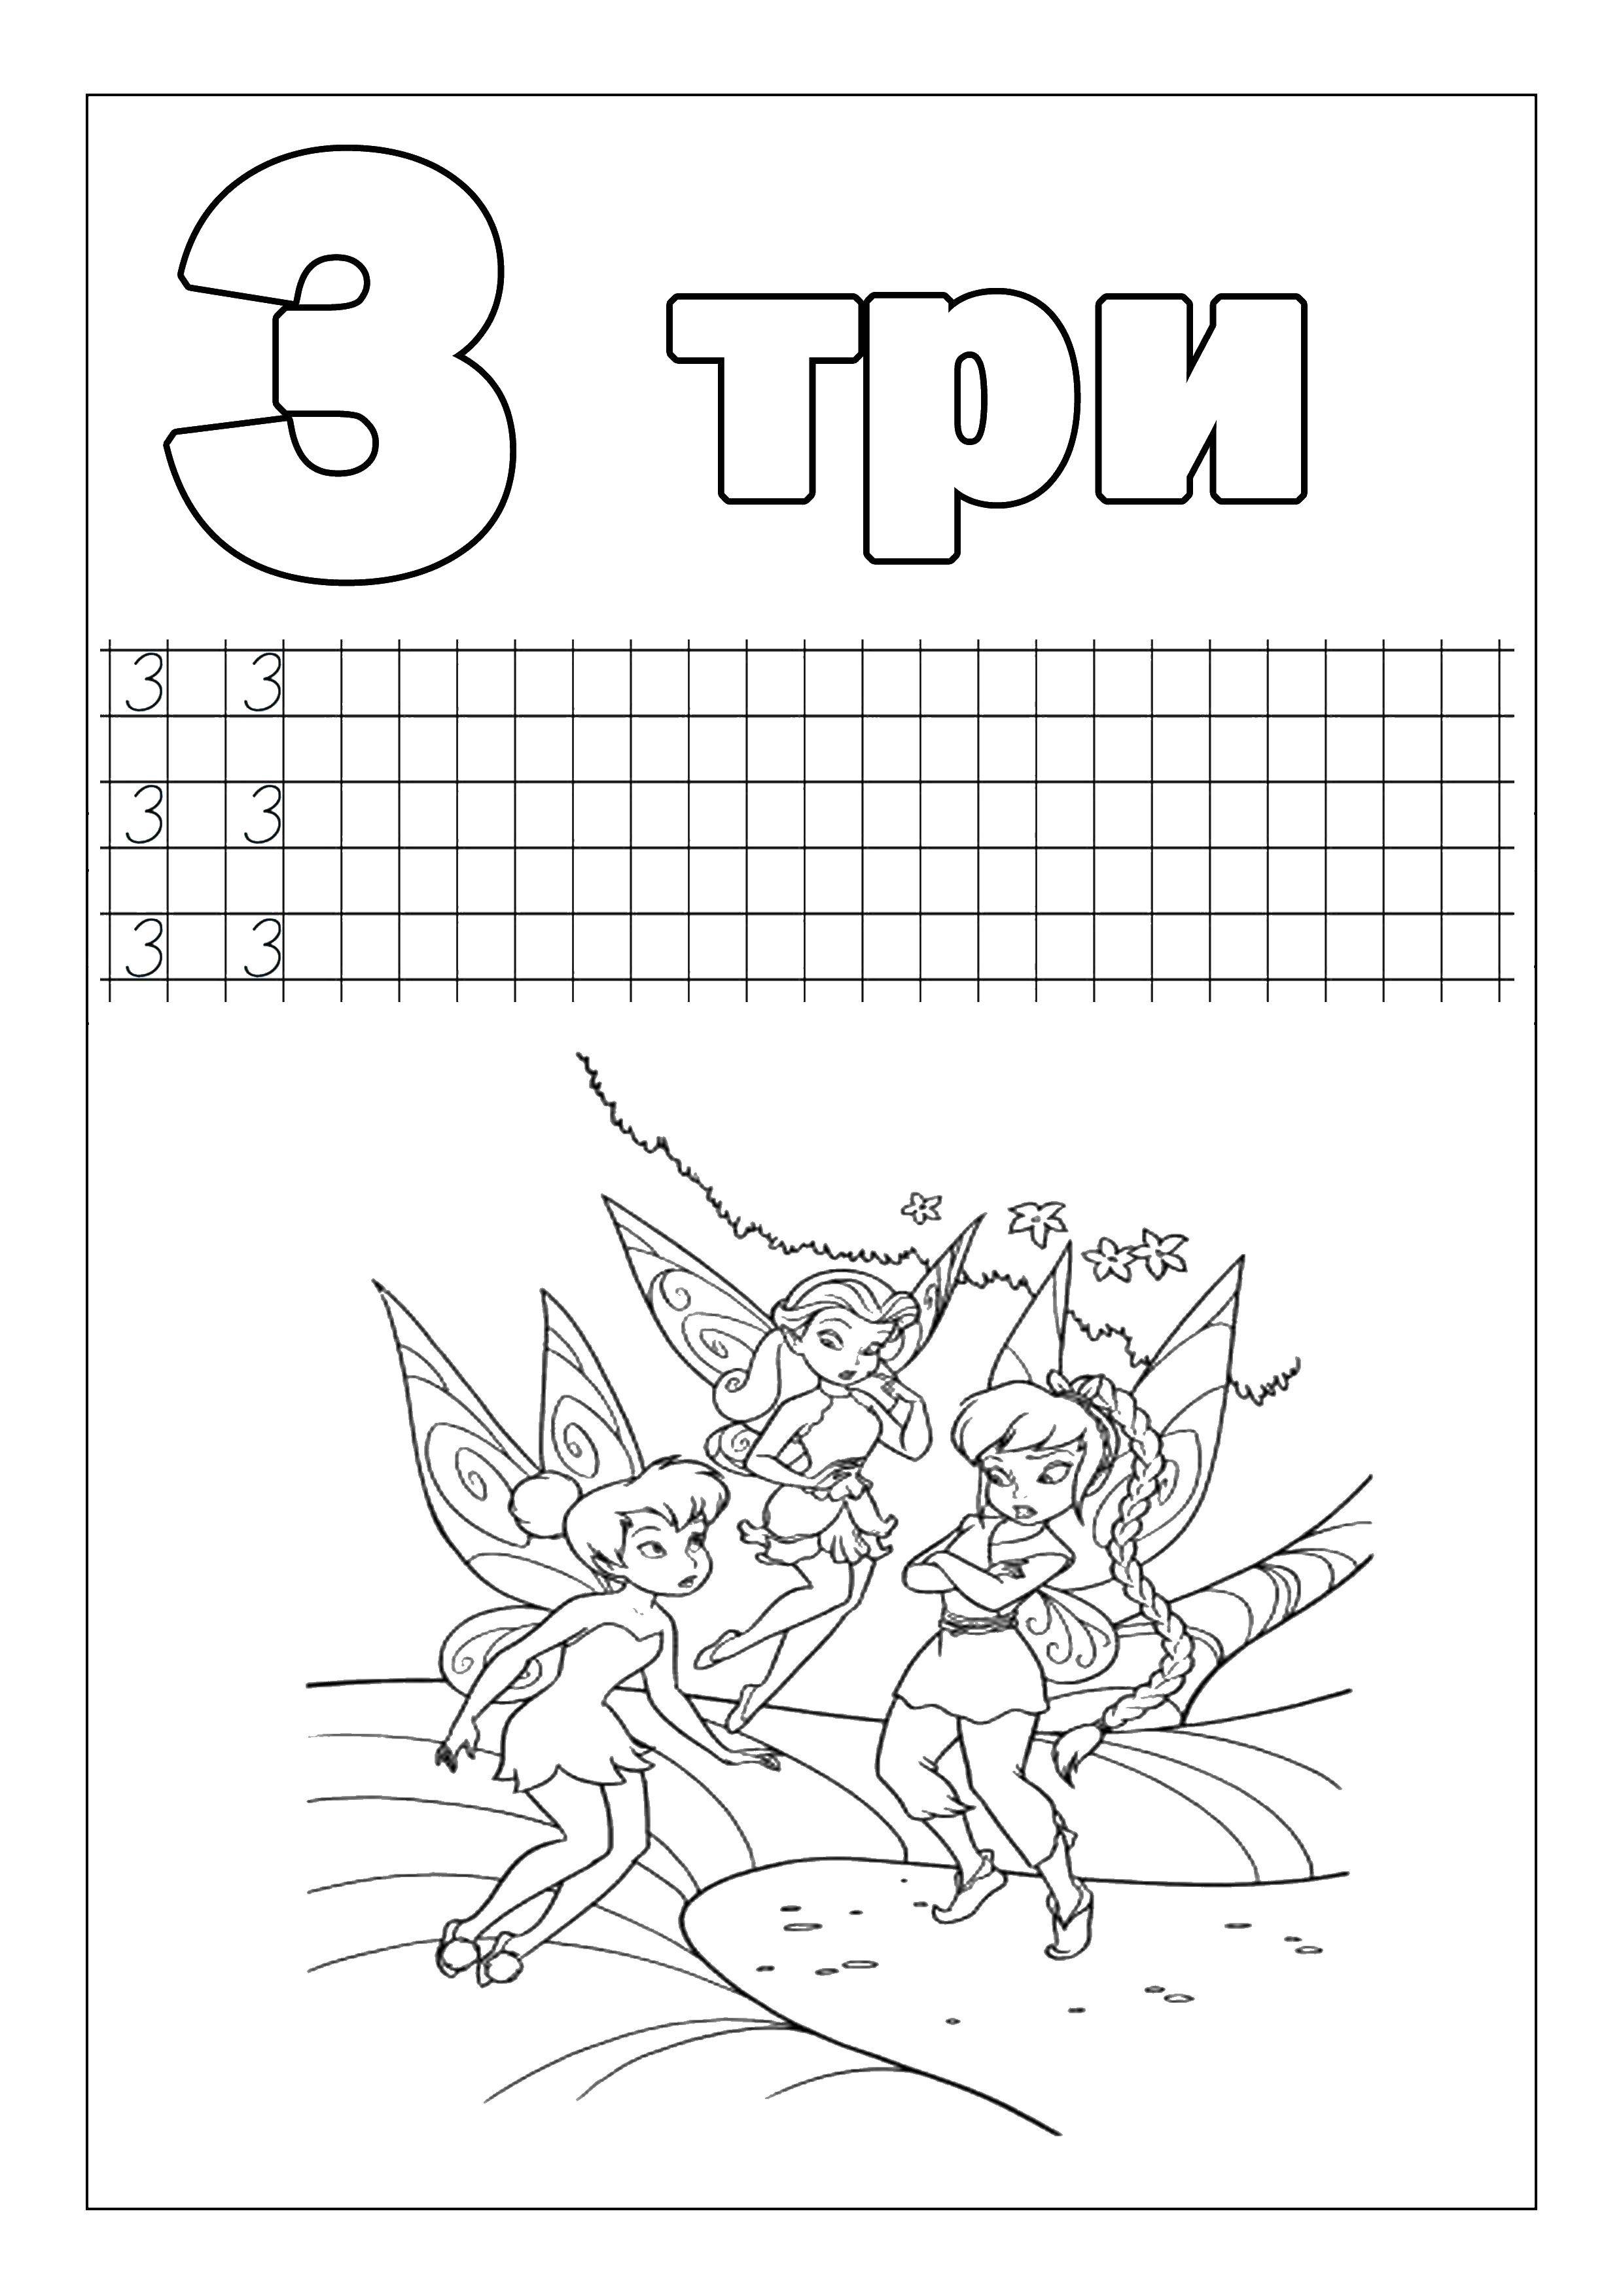 Coloring Recipe number 3. Category tracing numbers. Tags:  recipe, 3, numbers, fairy.